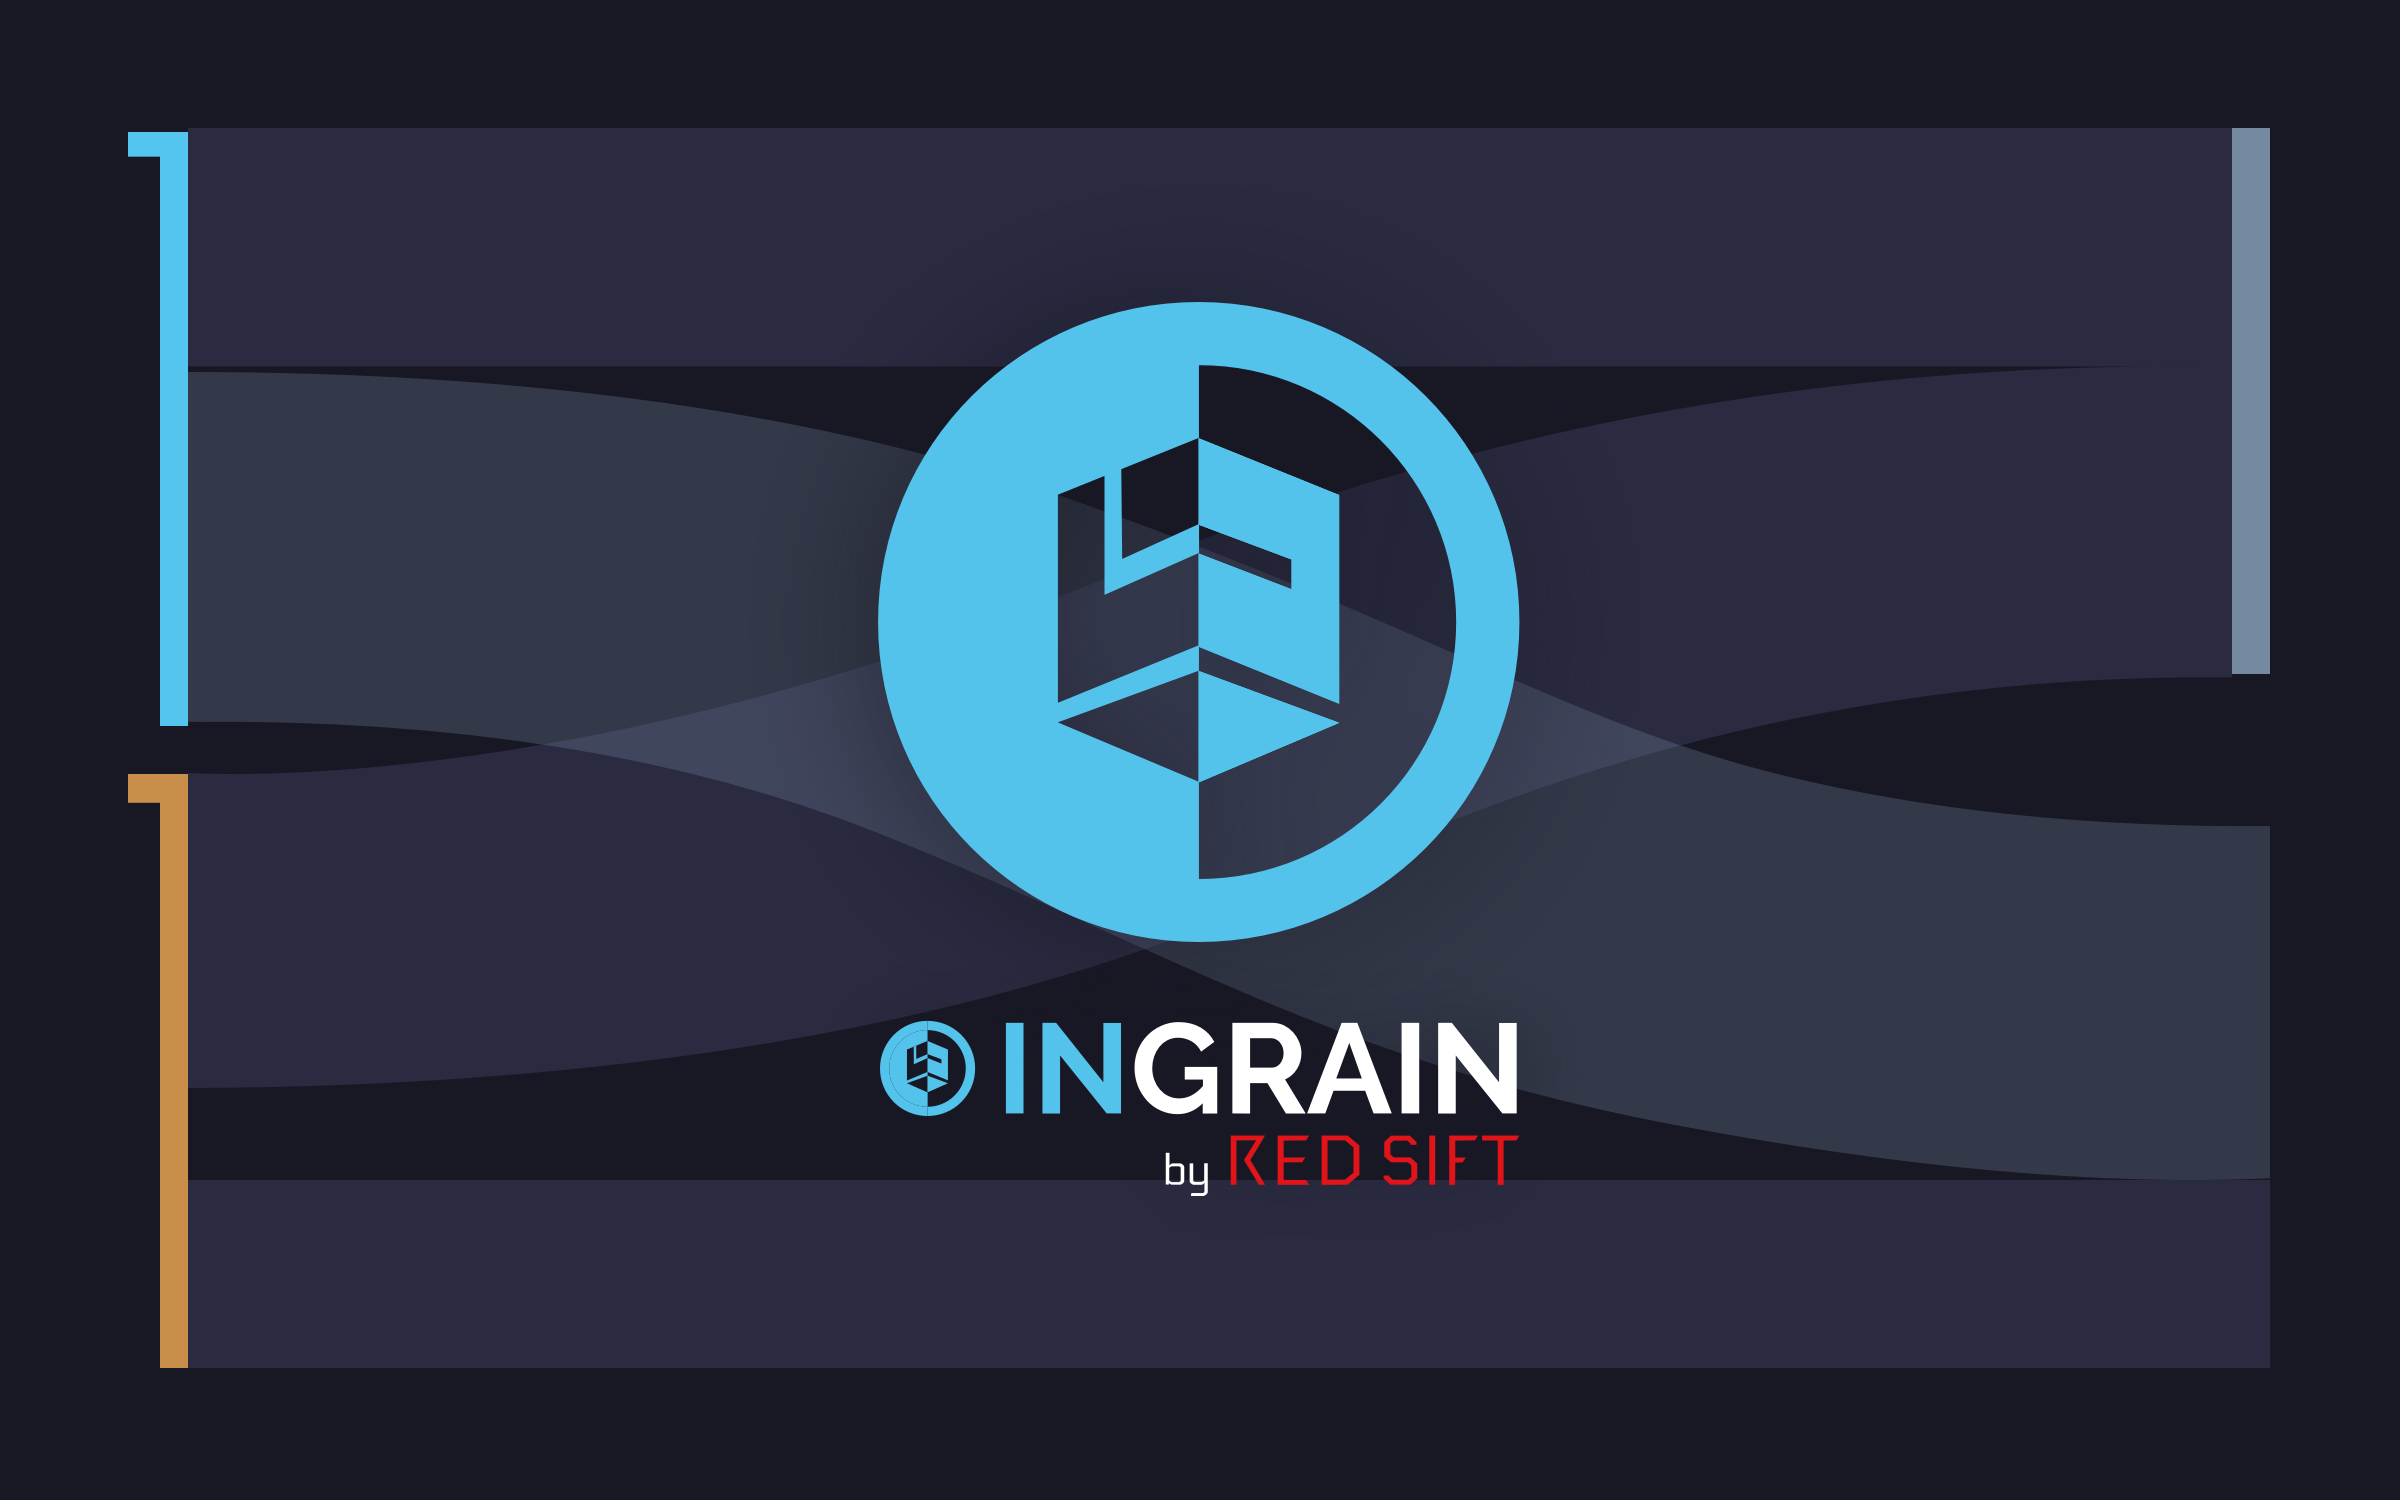 InGRAIN by Red Sift